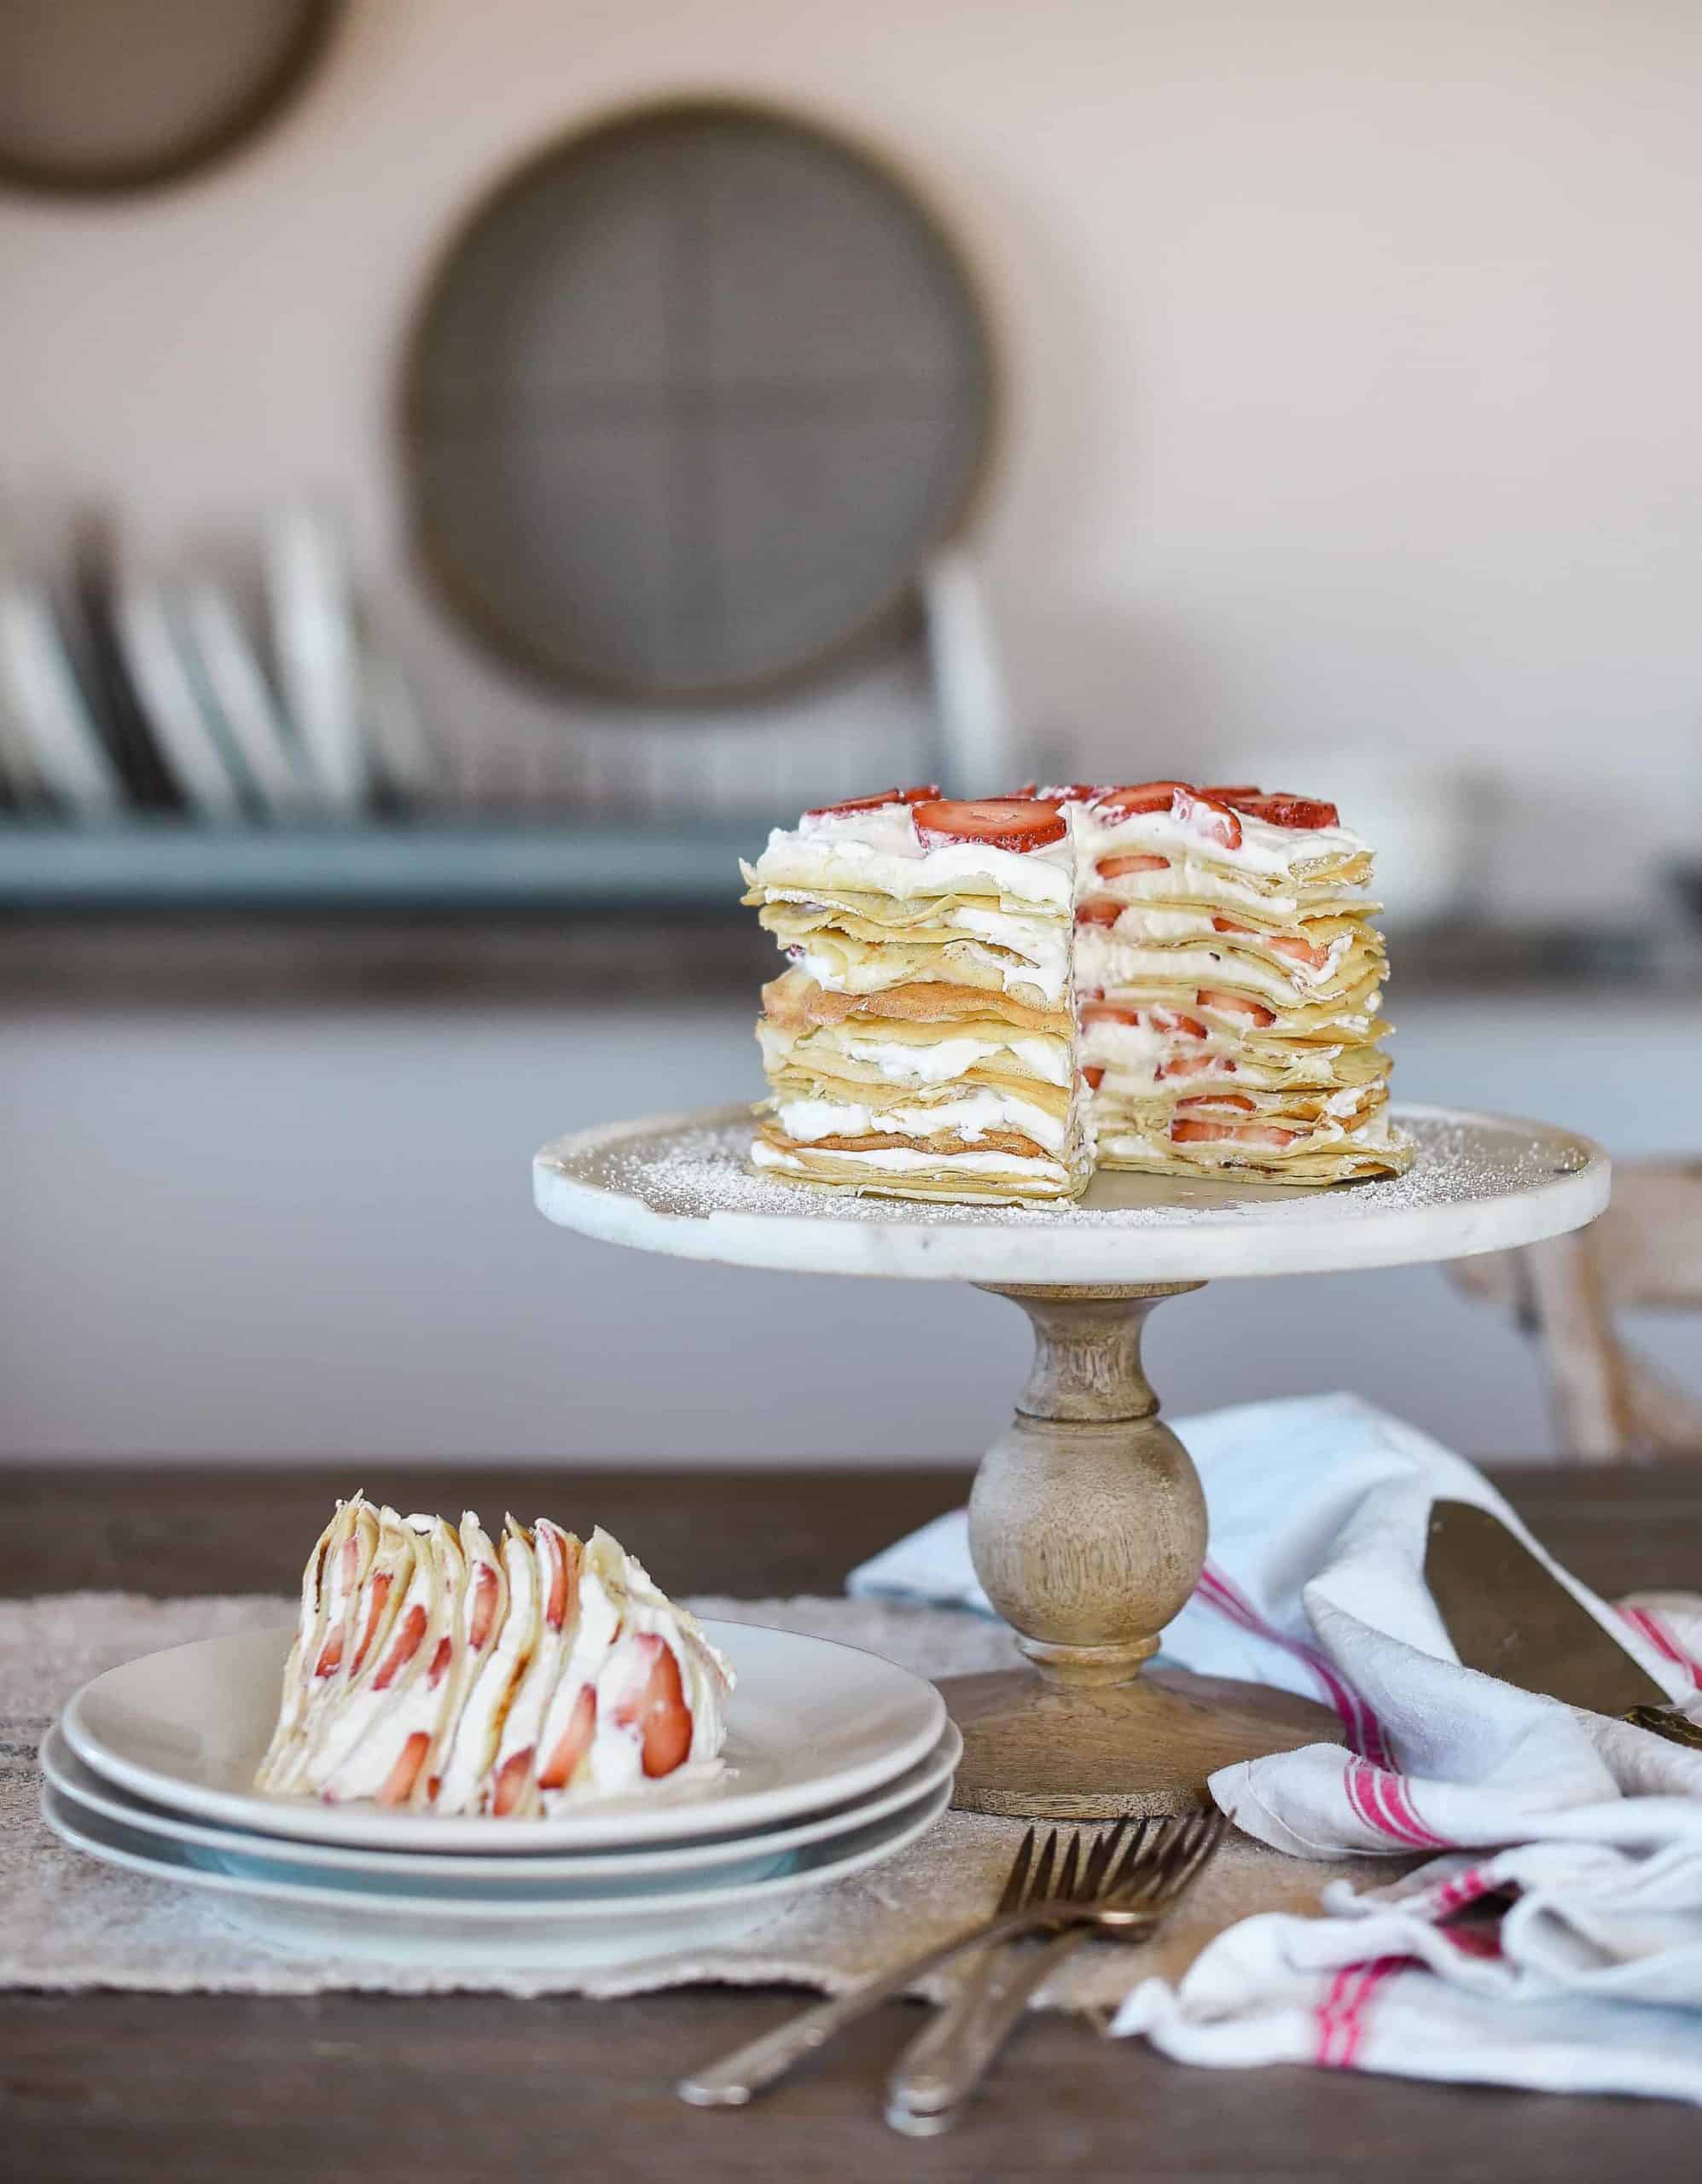 This crepe cake recipe is a show-stopper, and is perfect for special occasions! The cake is made of delicate crepes and filled with strawberries & whipped cream!